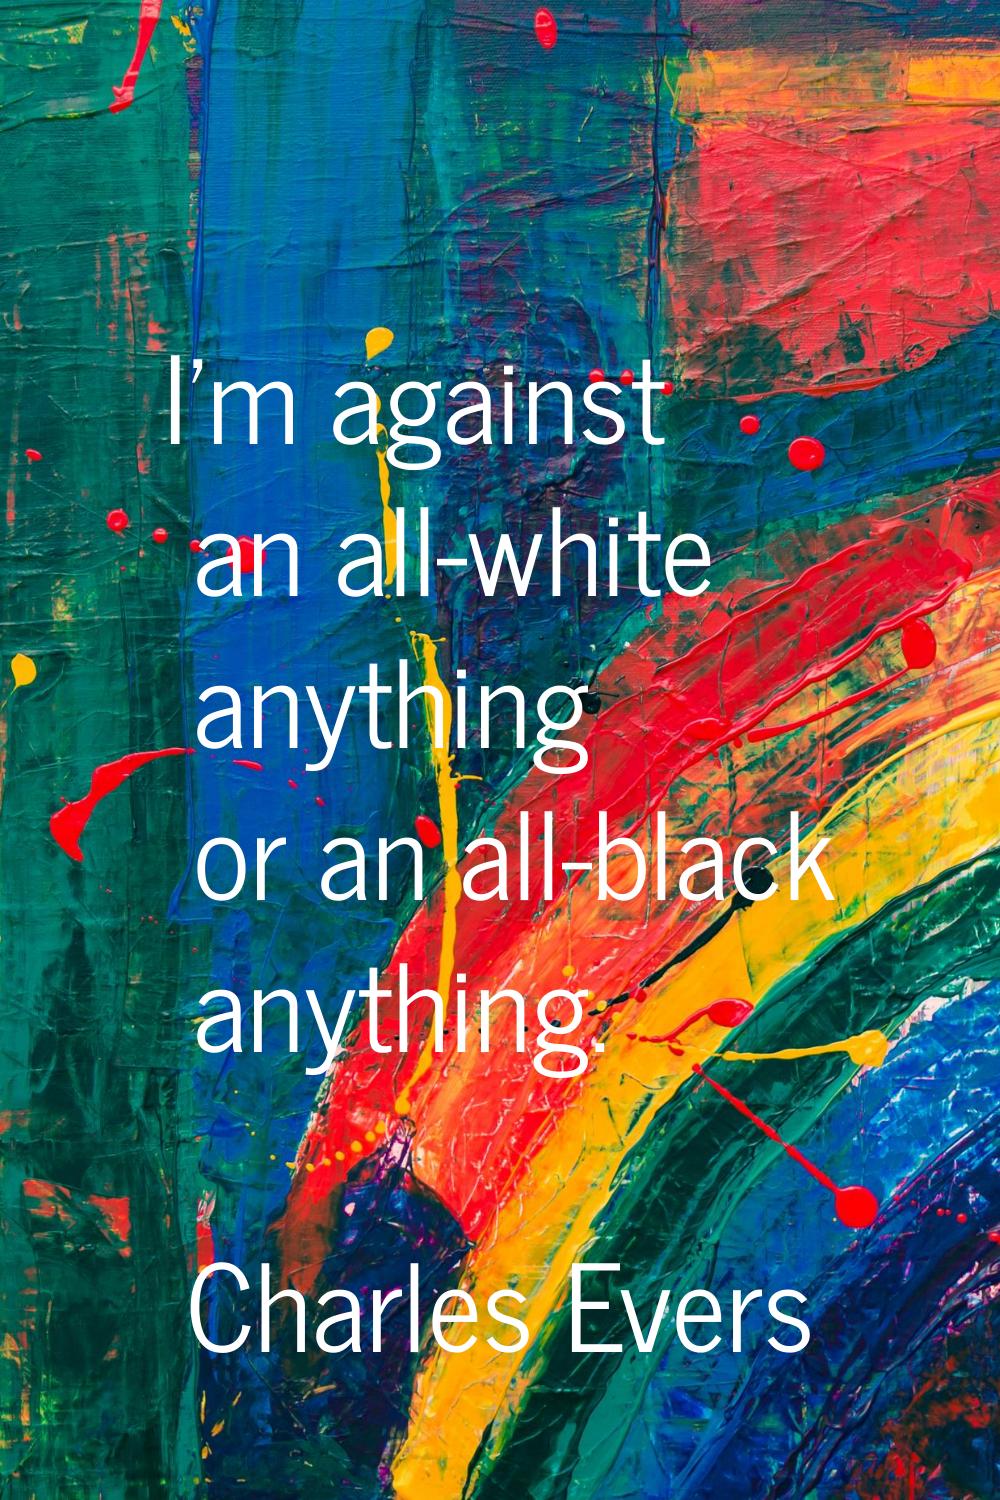 I'm against an all-white anything or an all-black anything.